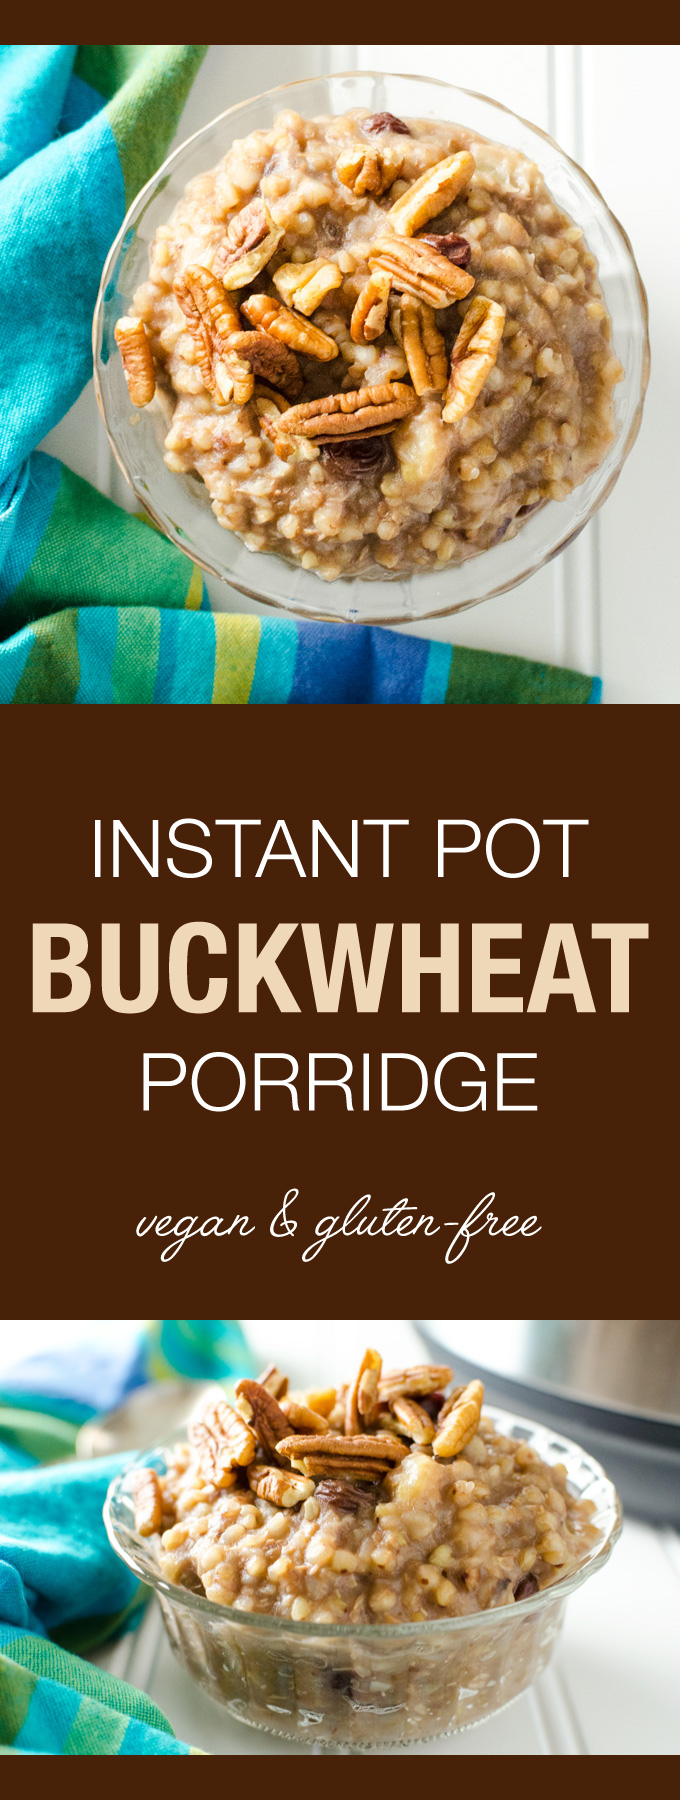 Instant Pot Buckwheat Porridge - you can prepare this gluten-free vegan recipe in less than thirty minutes. Naturally sweetened with banana, it has the creamy consistency of rice pudding | VeggiePrimer.com